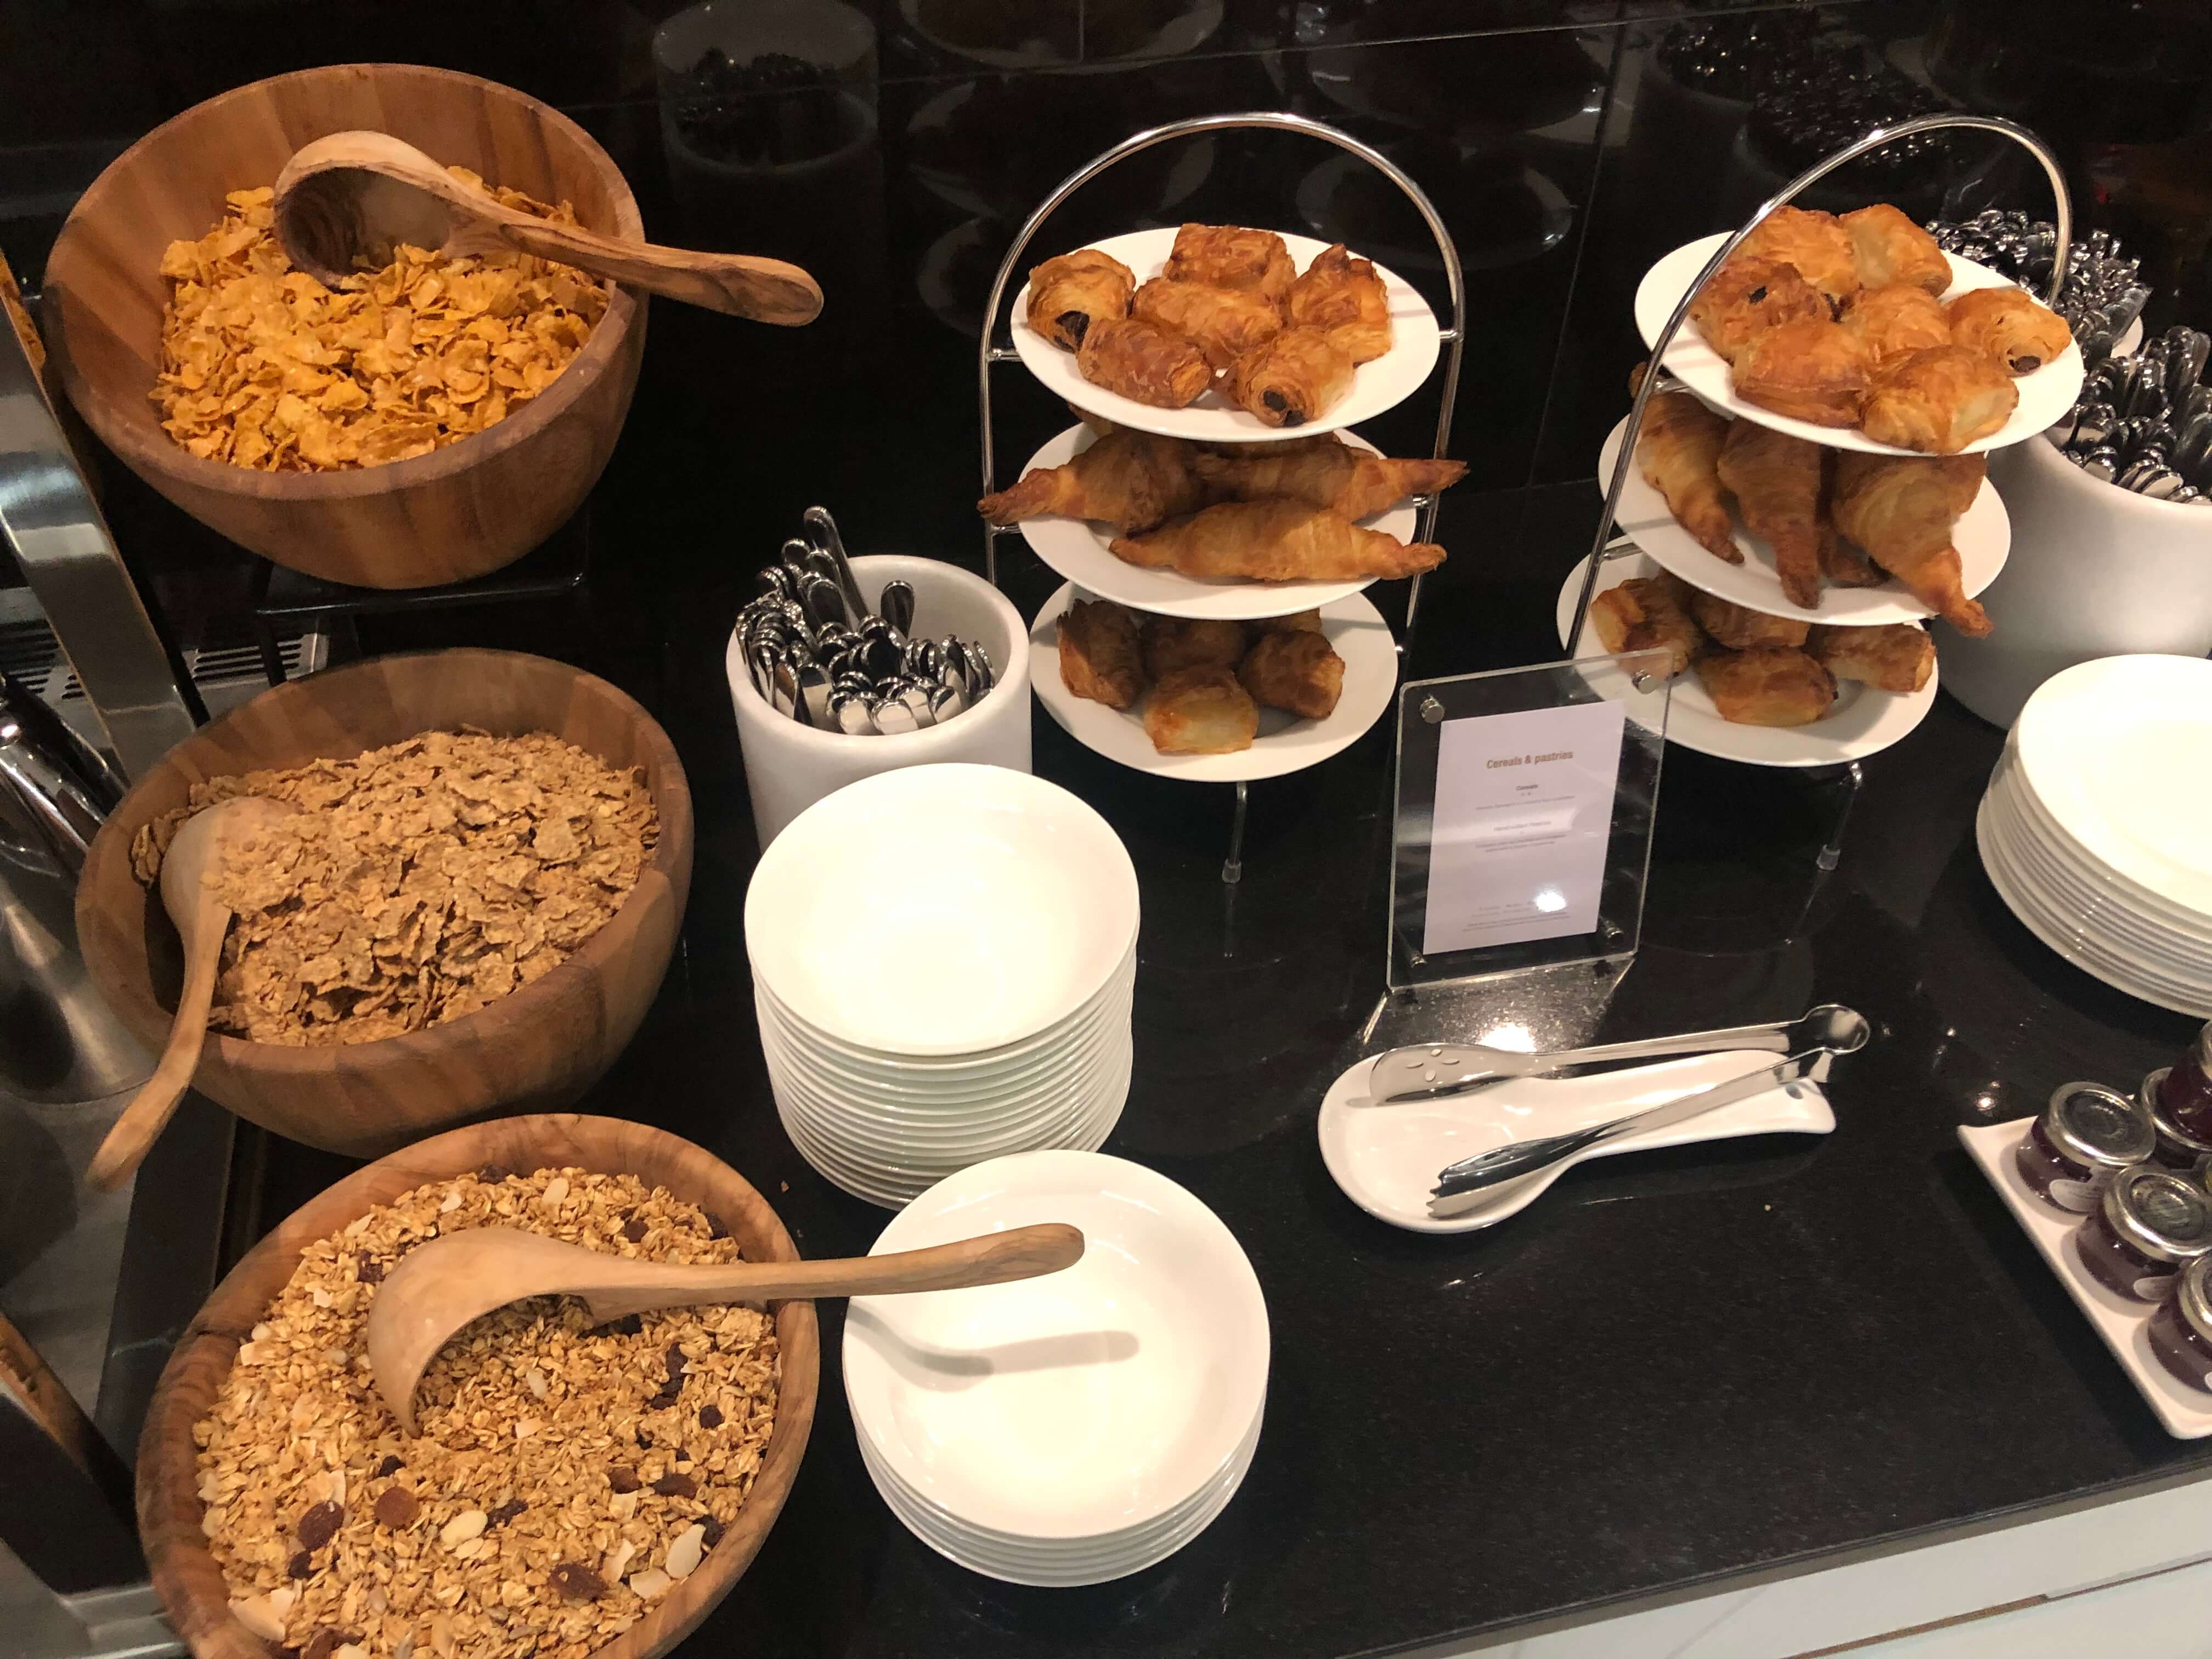 Cereal and pastry buffet at The House lounge at London Heathrow Terminal 4